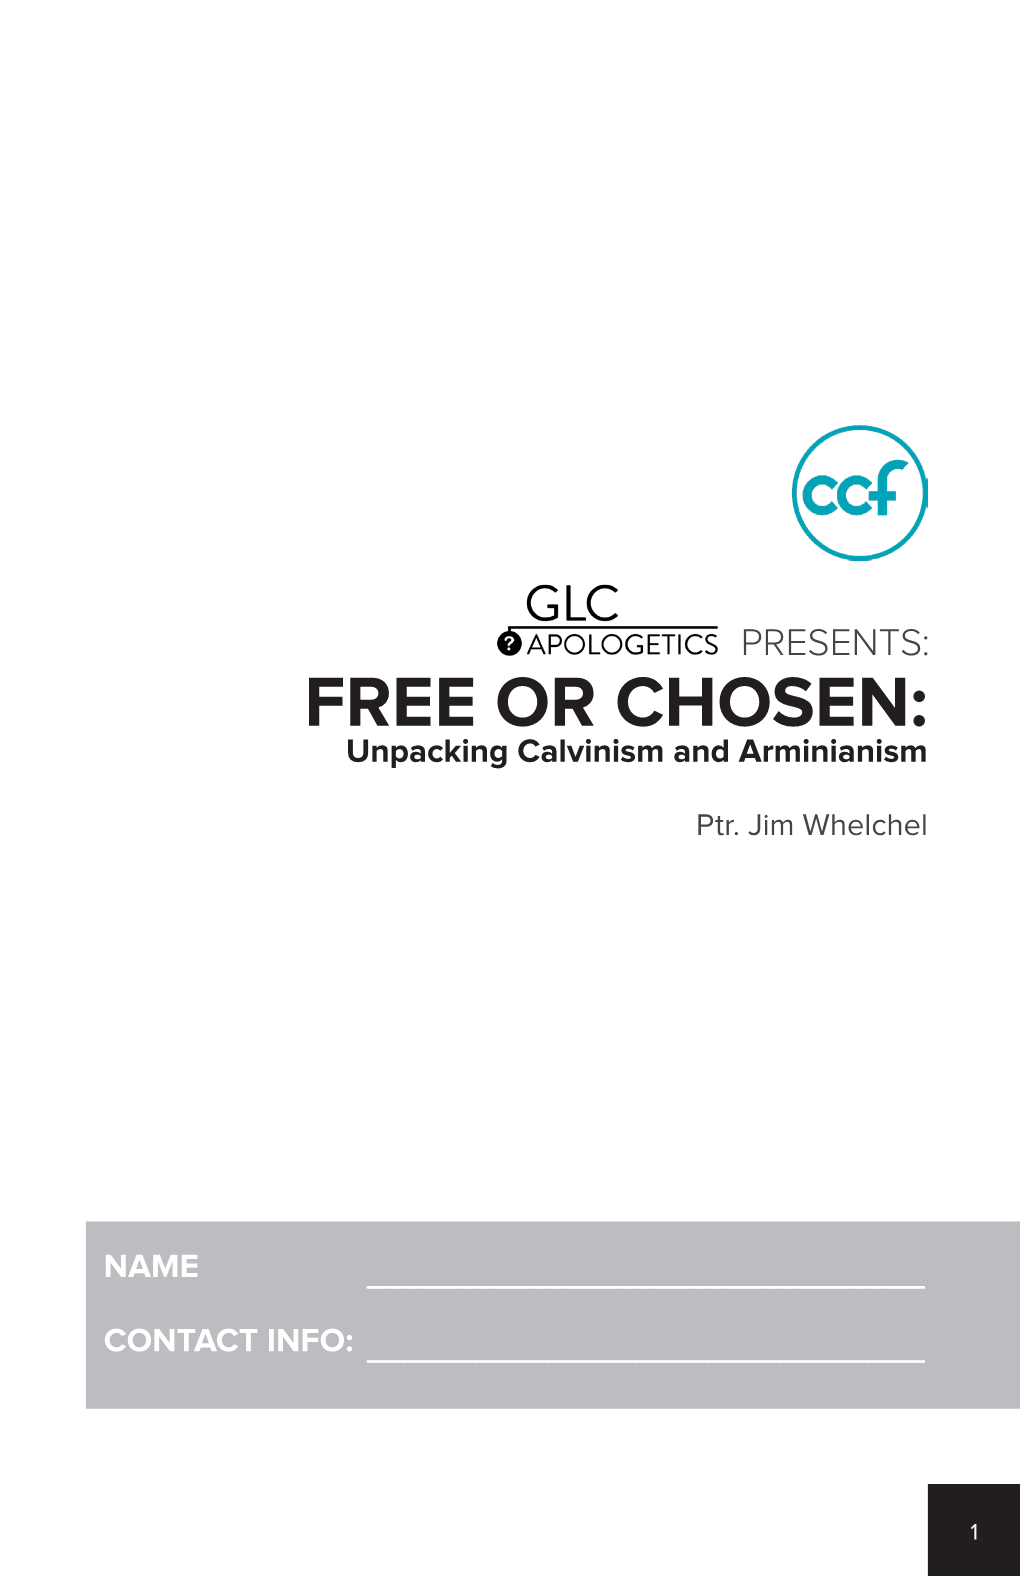 FREE OR CHOSEN: Unpacking Calvinism and Arminianism